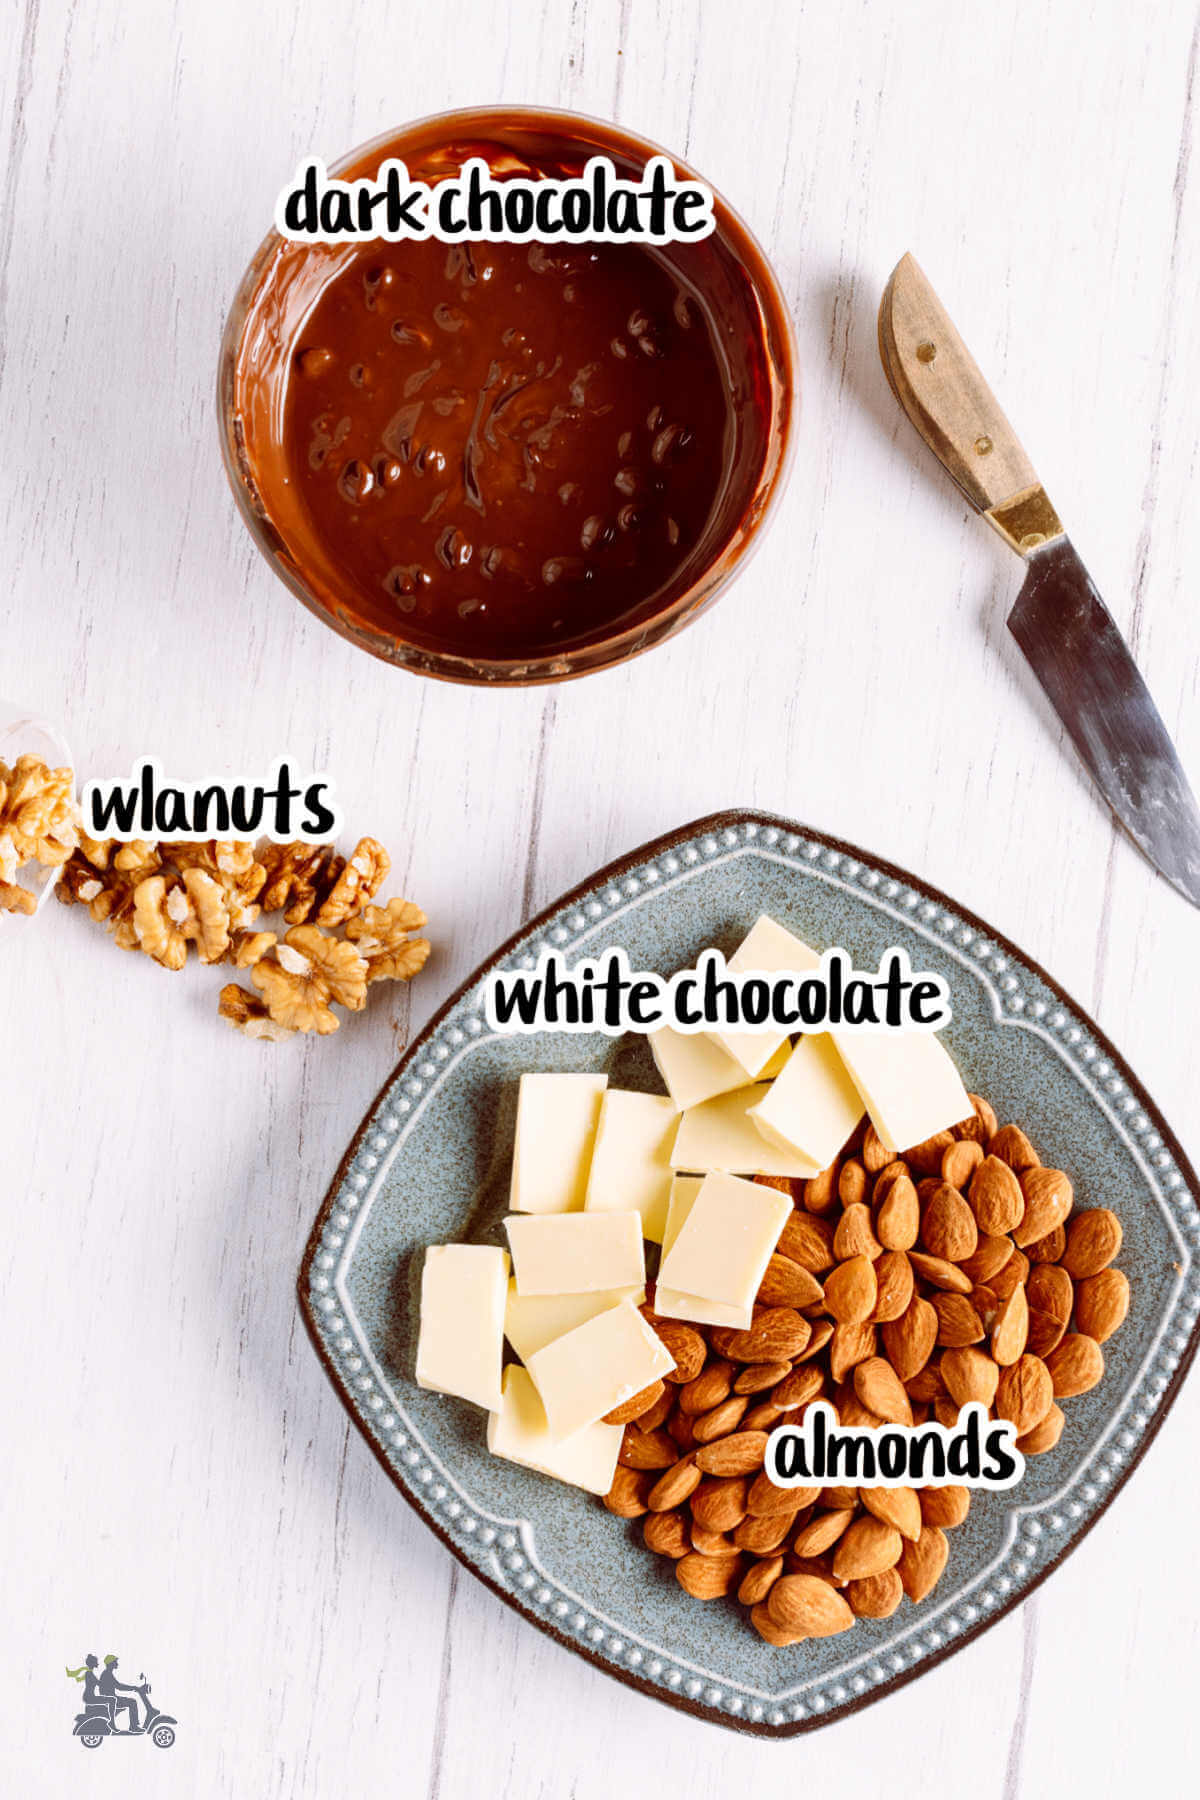 Image of the ingredients needed to make Almond chocolate bark. 